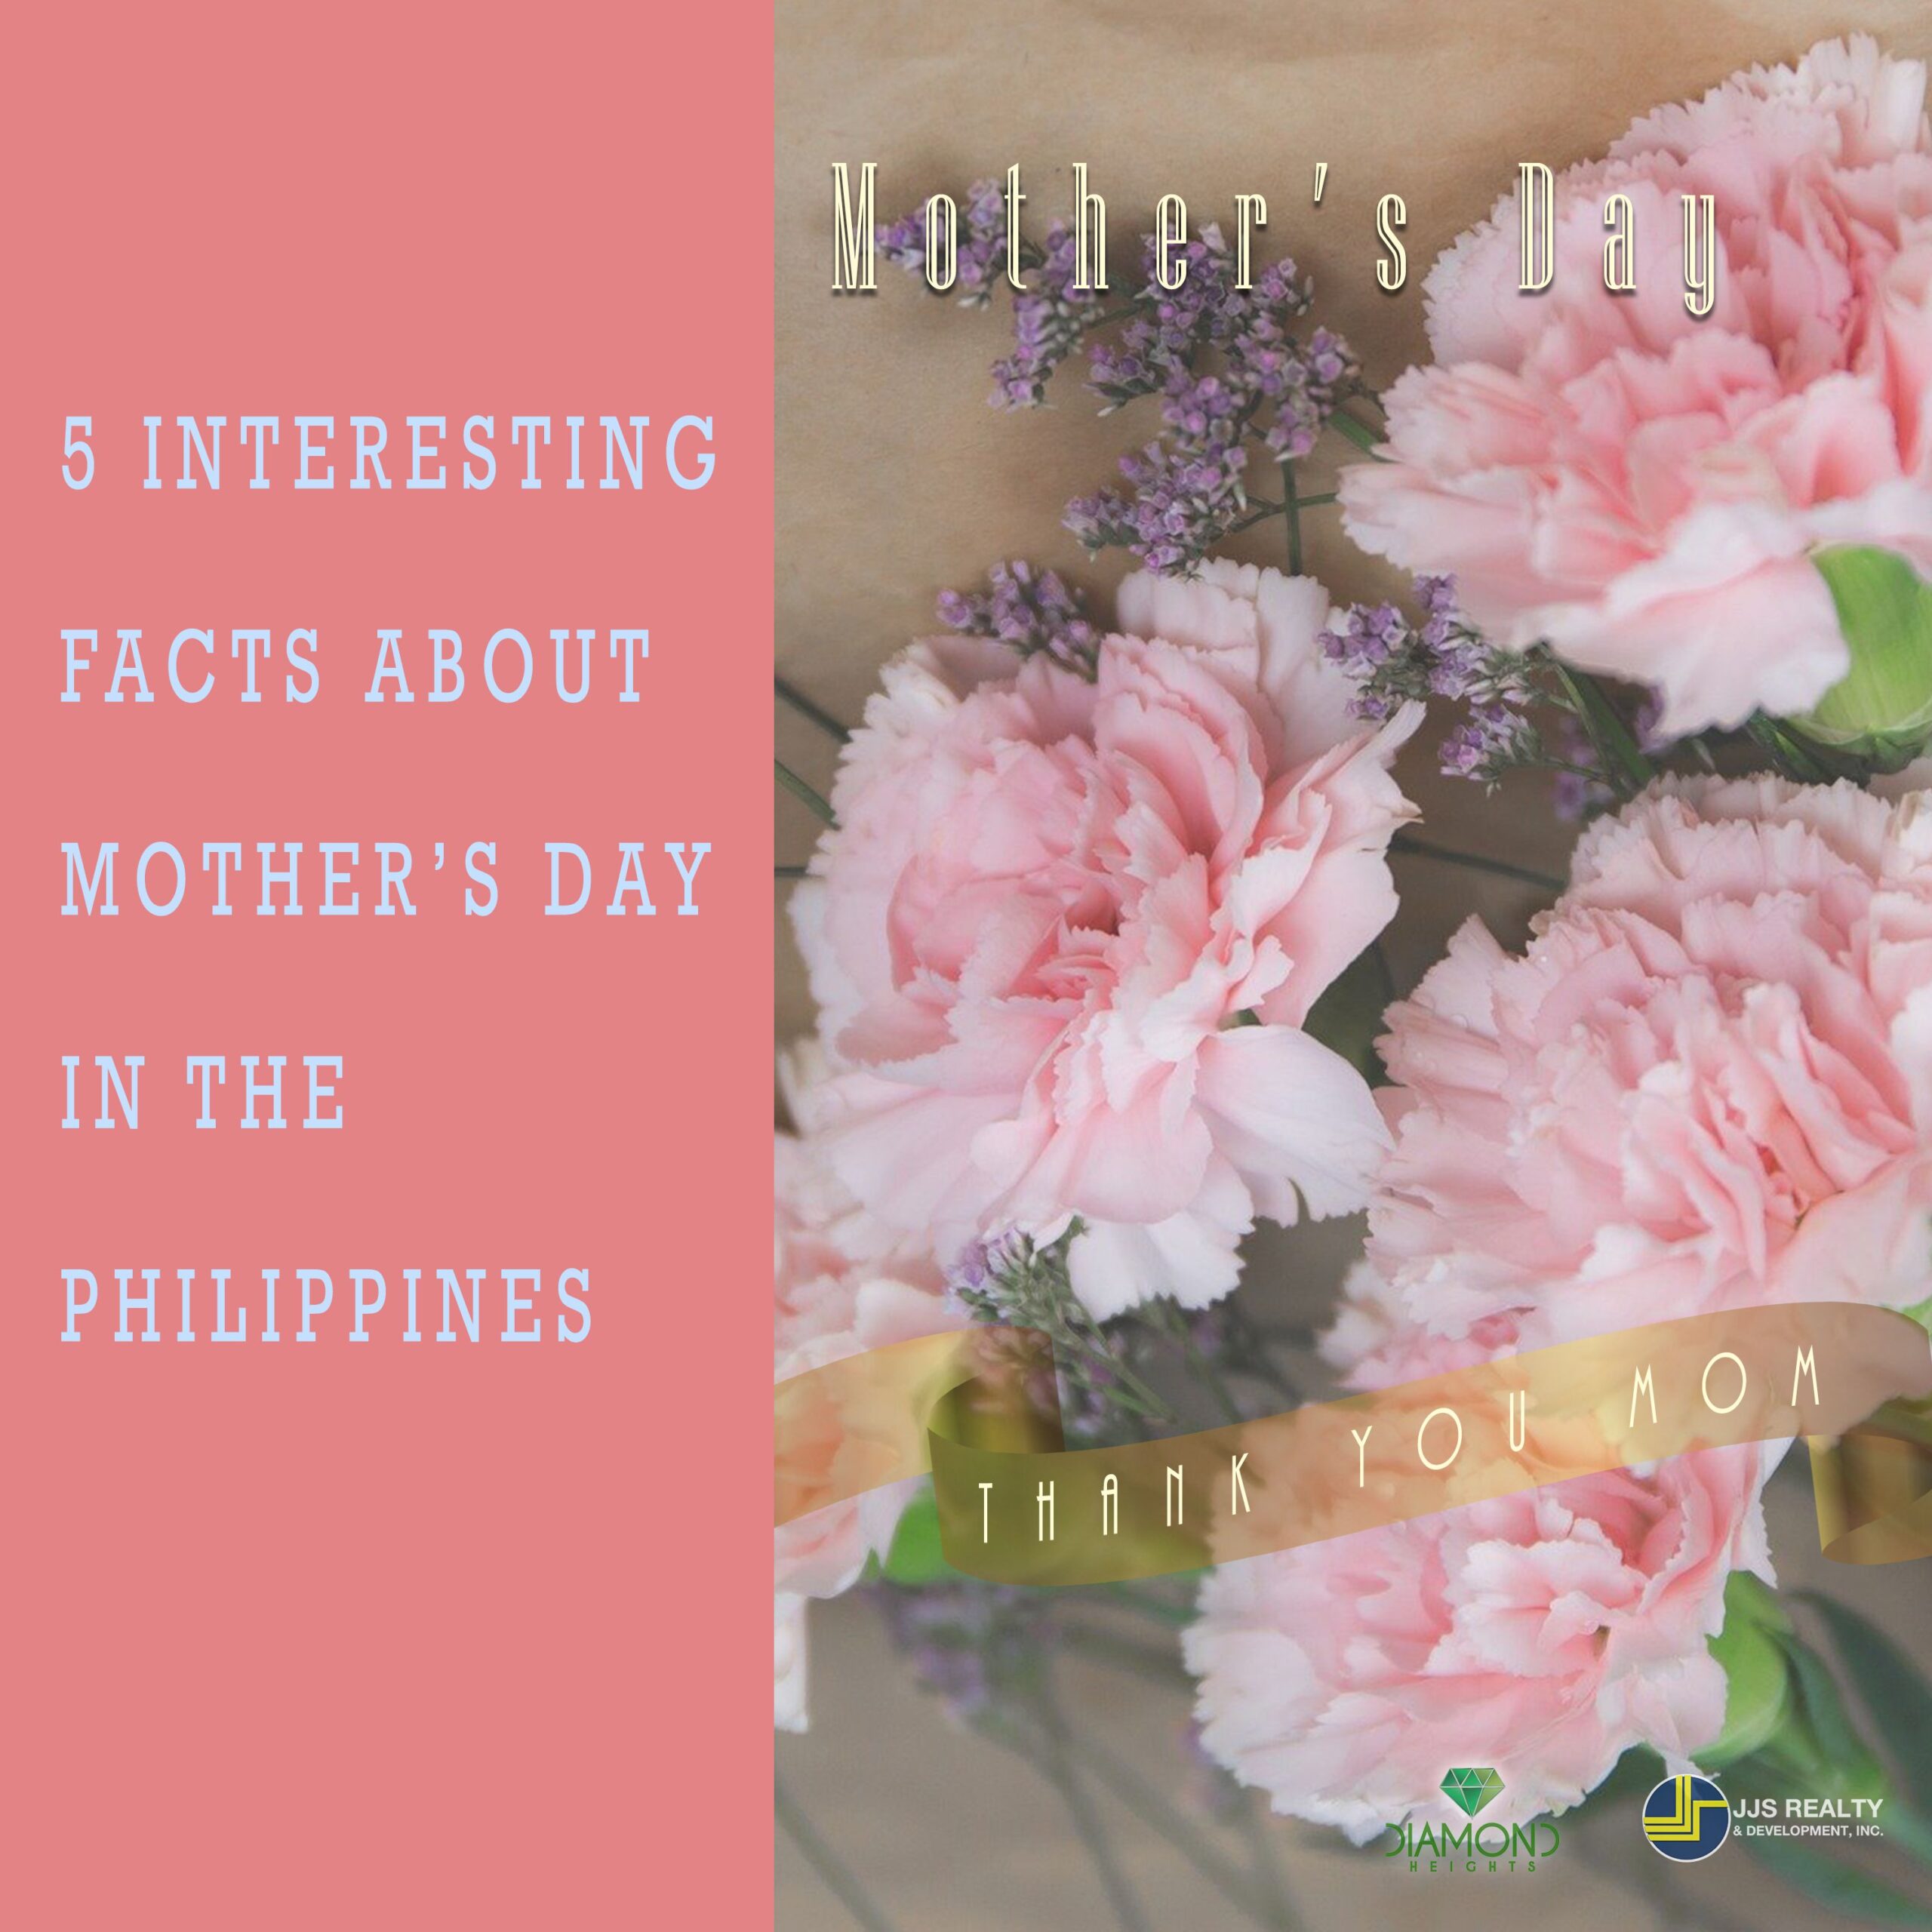 5 INTERESTING FACTS ABOUT MOTHERS DAY IN THE PHILIPPINES Holidays